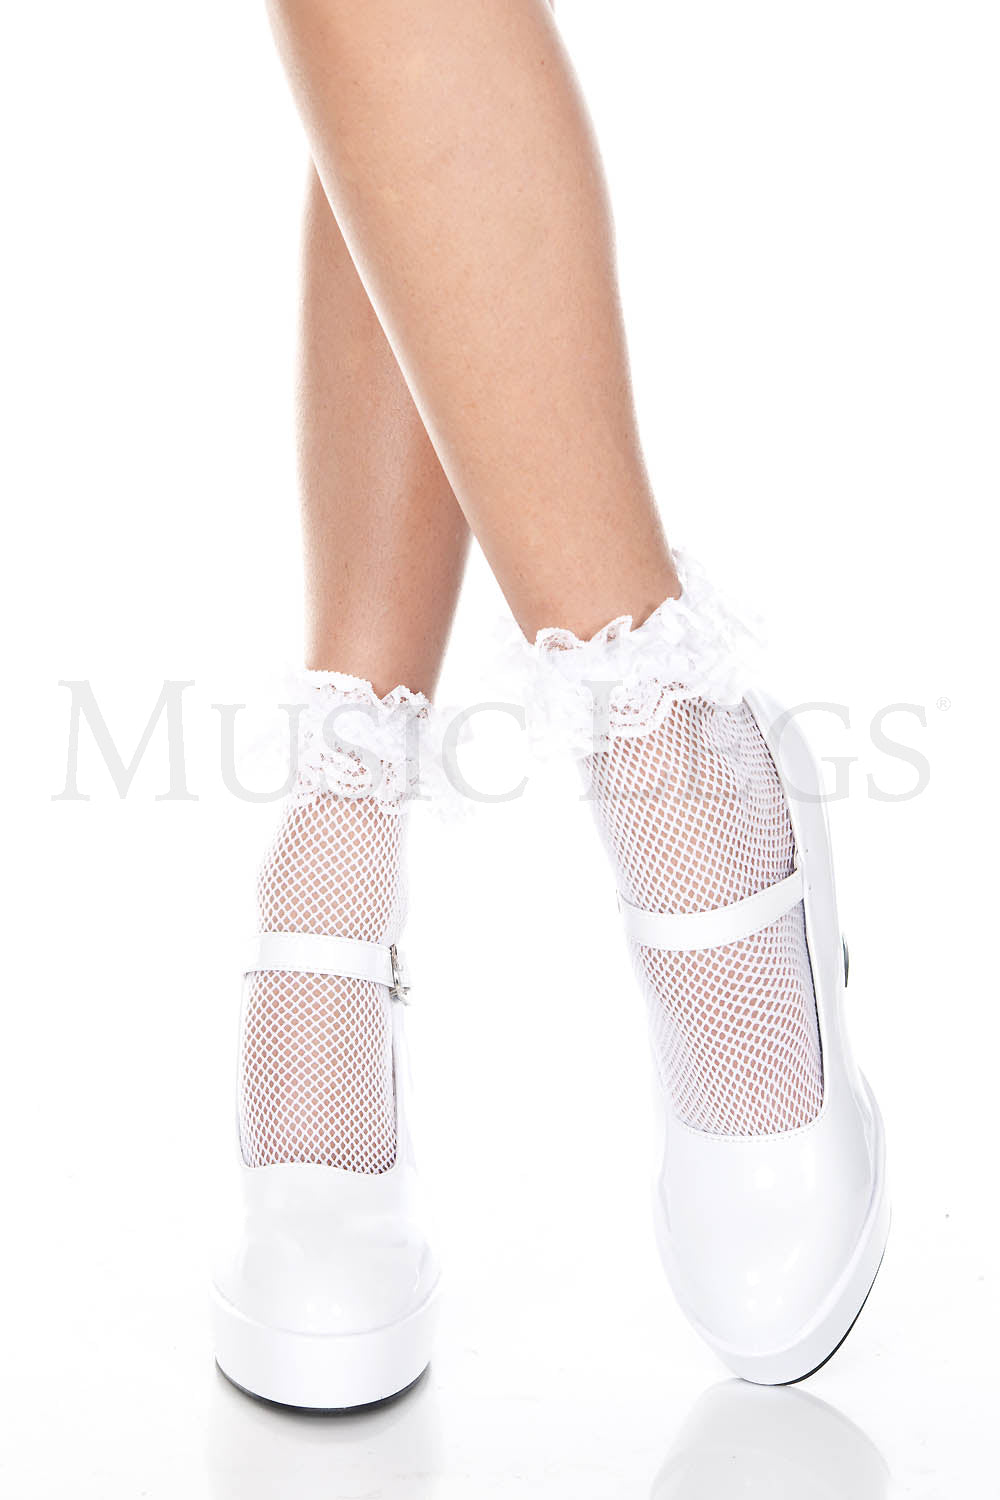 Fishnet Anklet with Ruffle Trim